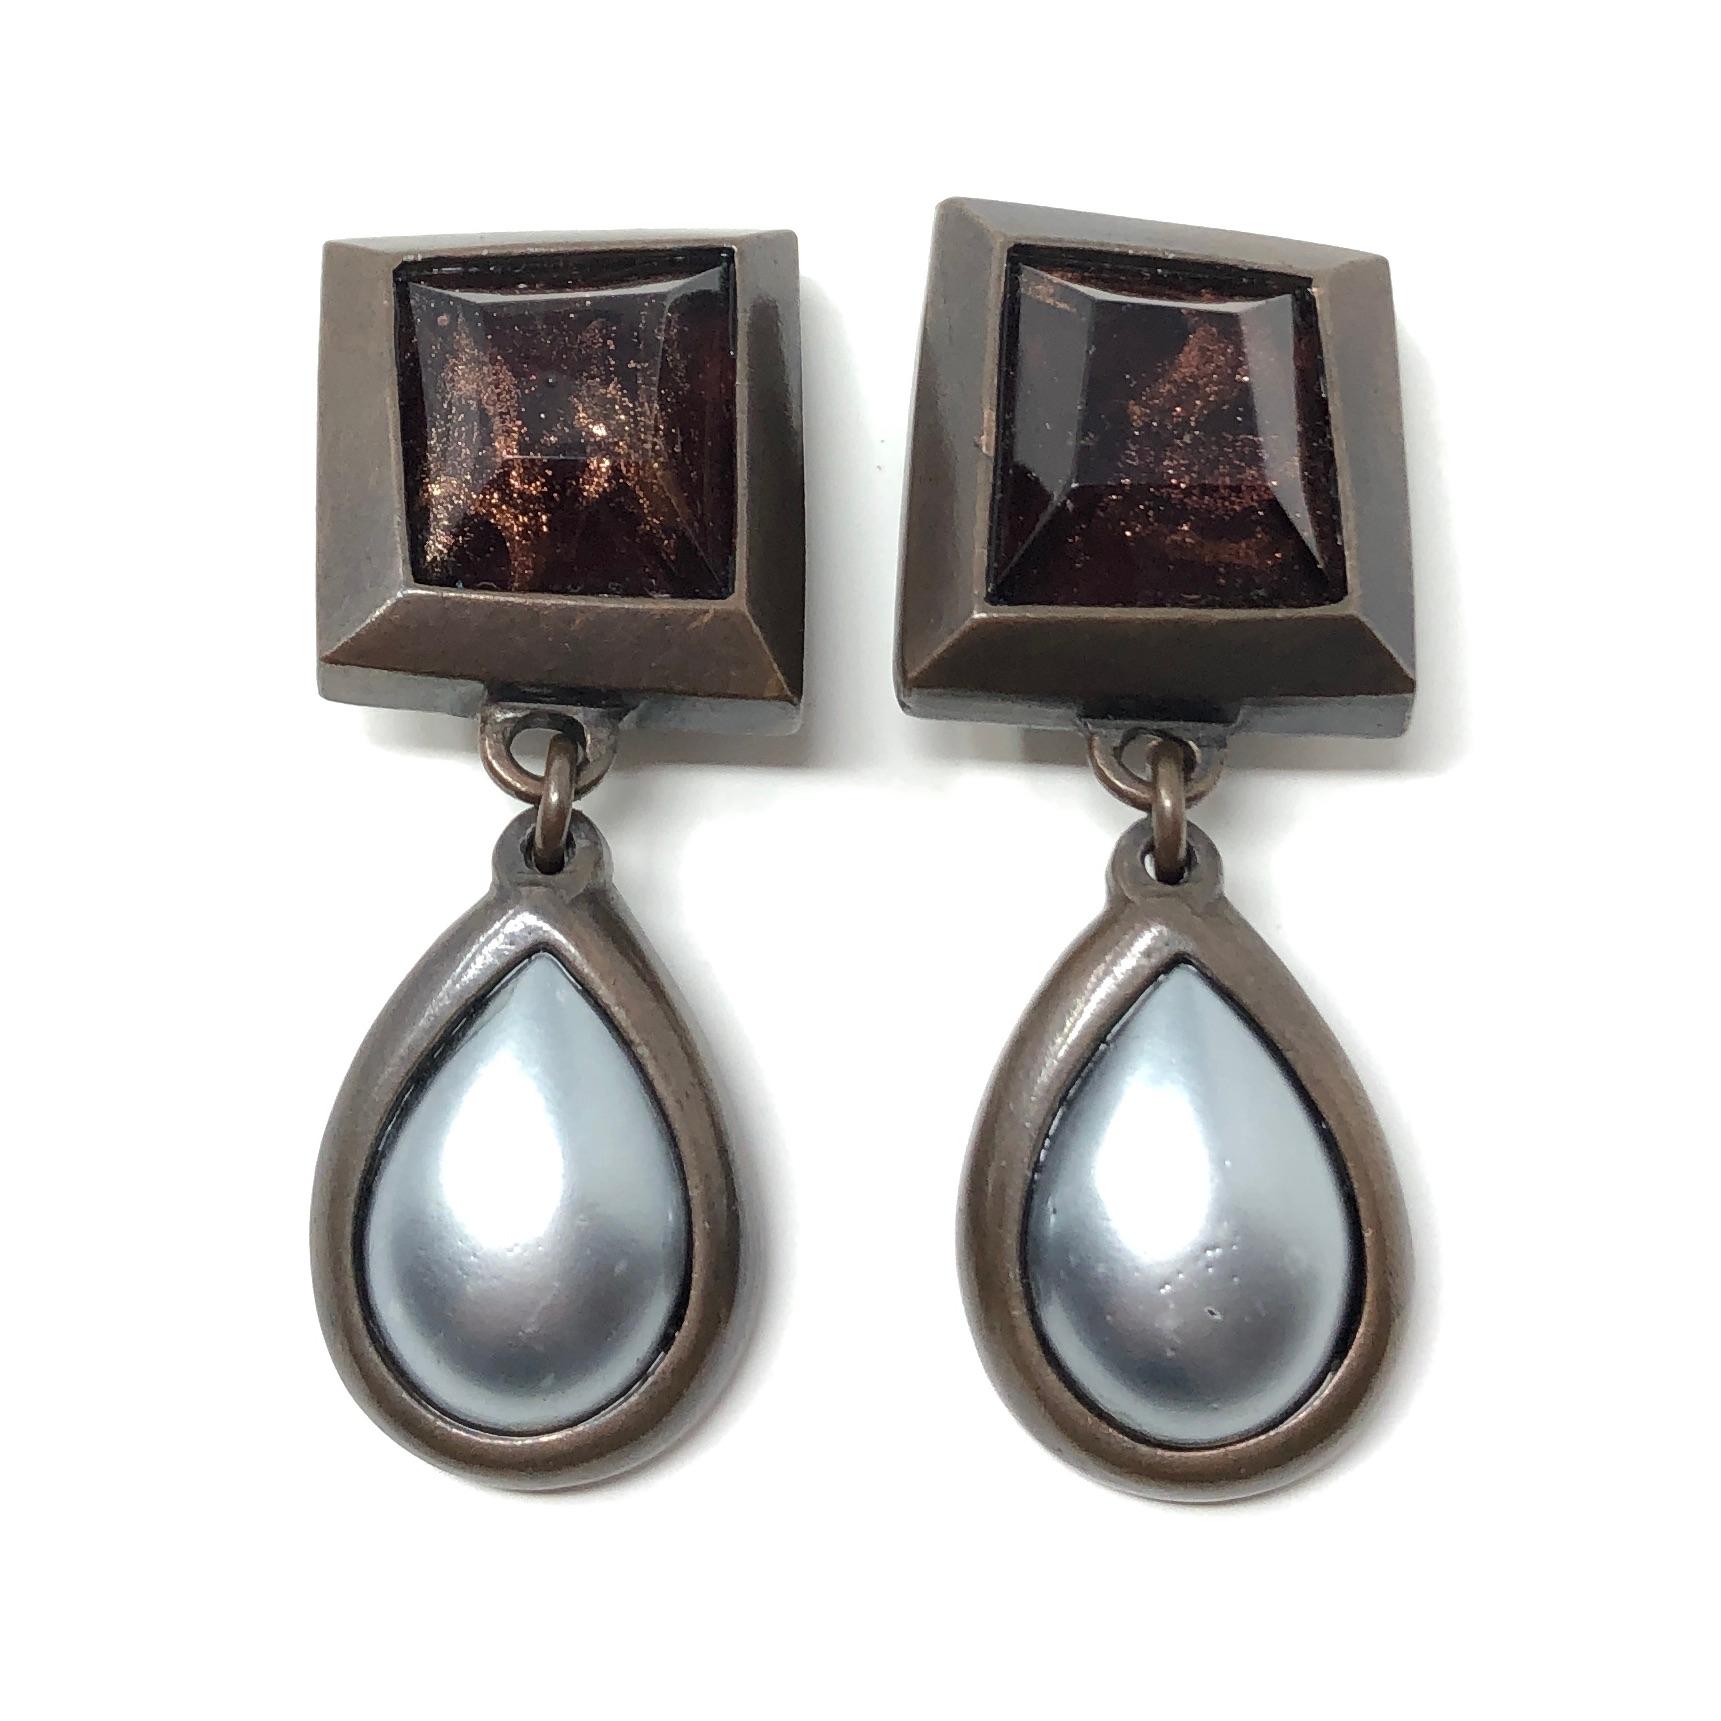 Fashion forward and striking, these earrings are a stylish 1980s Yves Saint Laurent design. They are clip on.

Condition Report:
Very Good - A tiny bit of scratching to the surface of the faux pearls. This is only visible upon very close inspection,